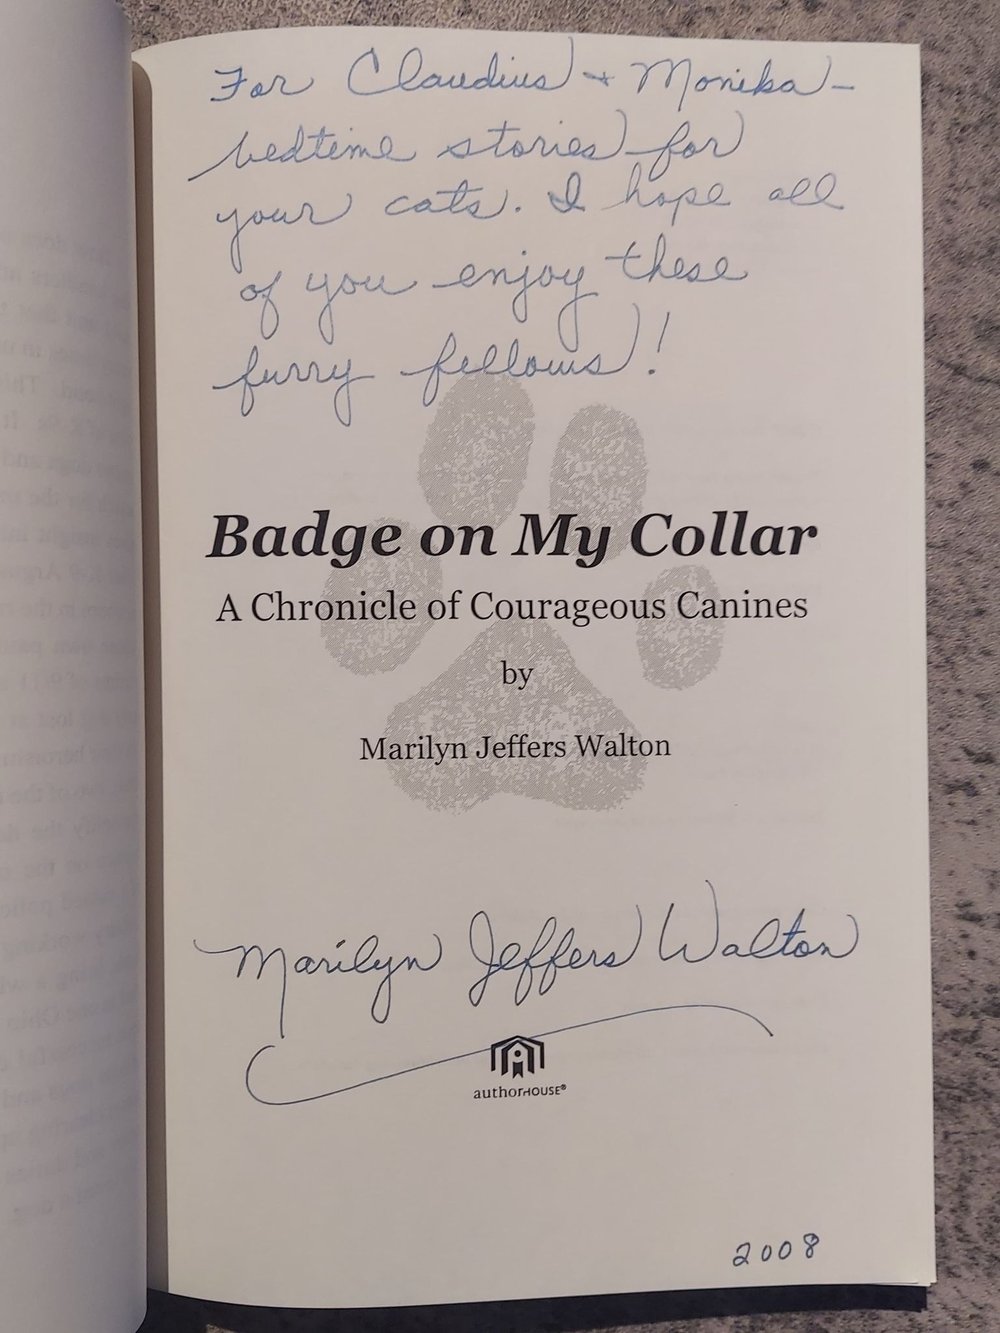 Badge on My Collar: A Chronicle of Courageous Canines, by Marilyn Jeffers Walton - SIGNED